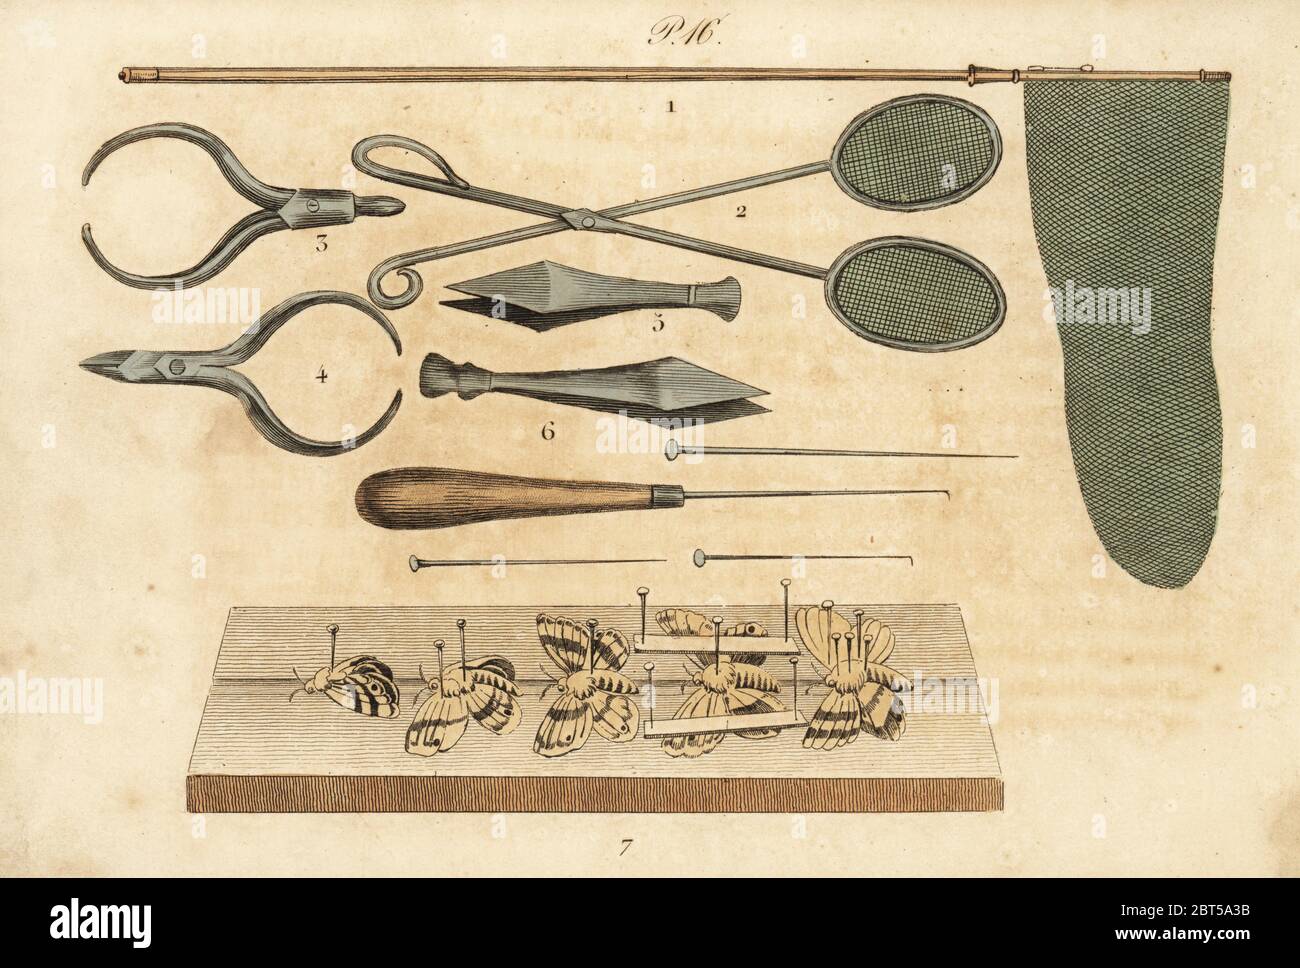 Butterfly collector tools, 19th century. Butterfly net, raquet nets, pincers, pins, etc. Handcoloured lithograph from Musee du Naturaliste dedie a la Jeunesse, Histoire des Papillons, Hippolyte and Polydor Pauquet, Paris, 1833. Stock Photo